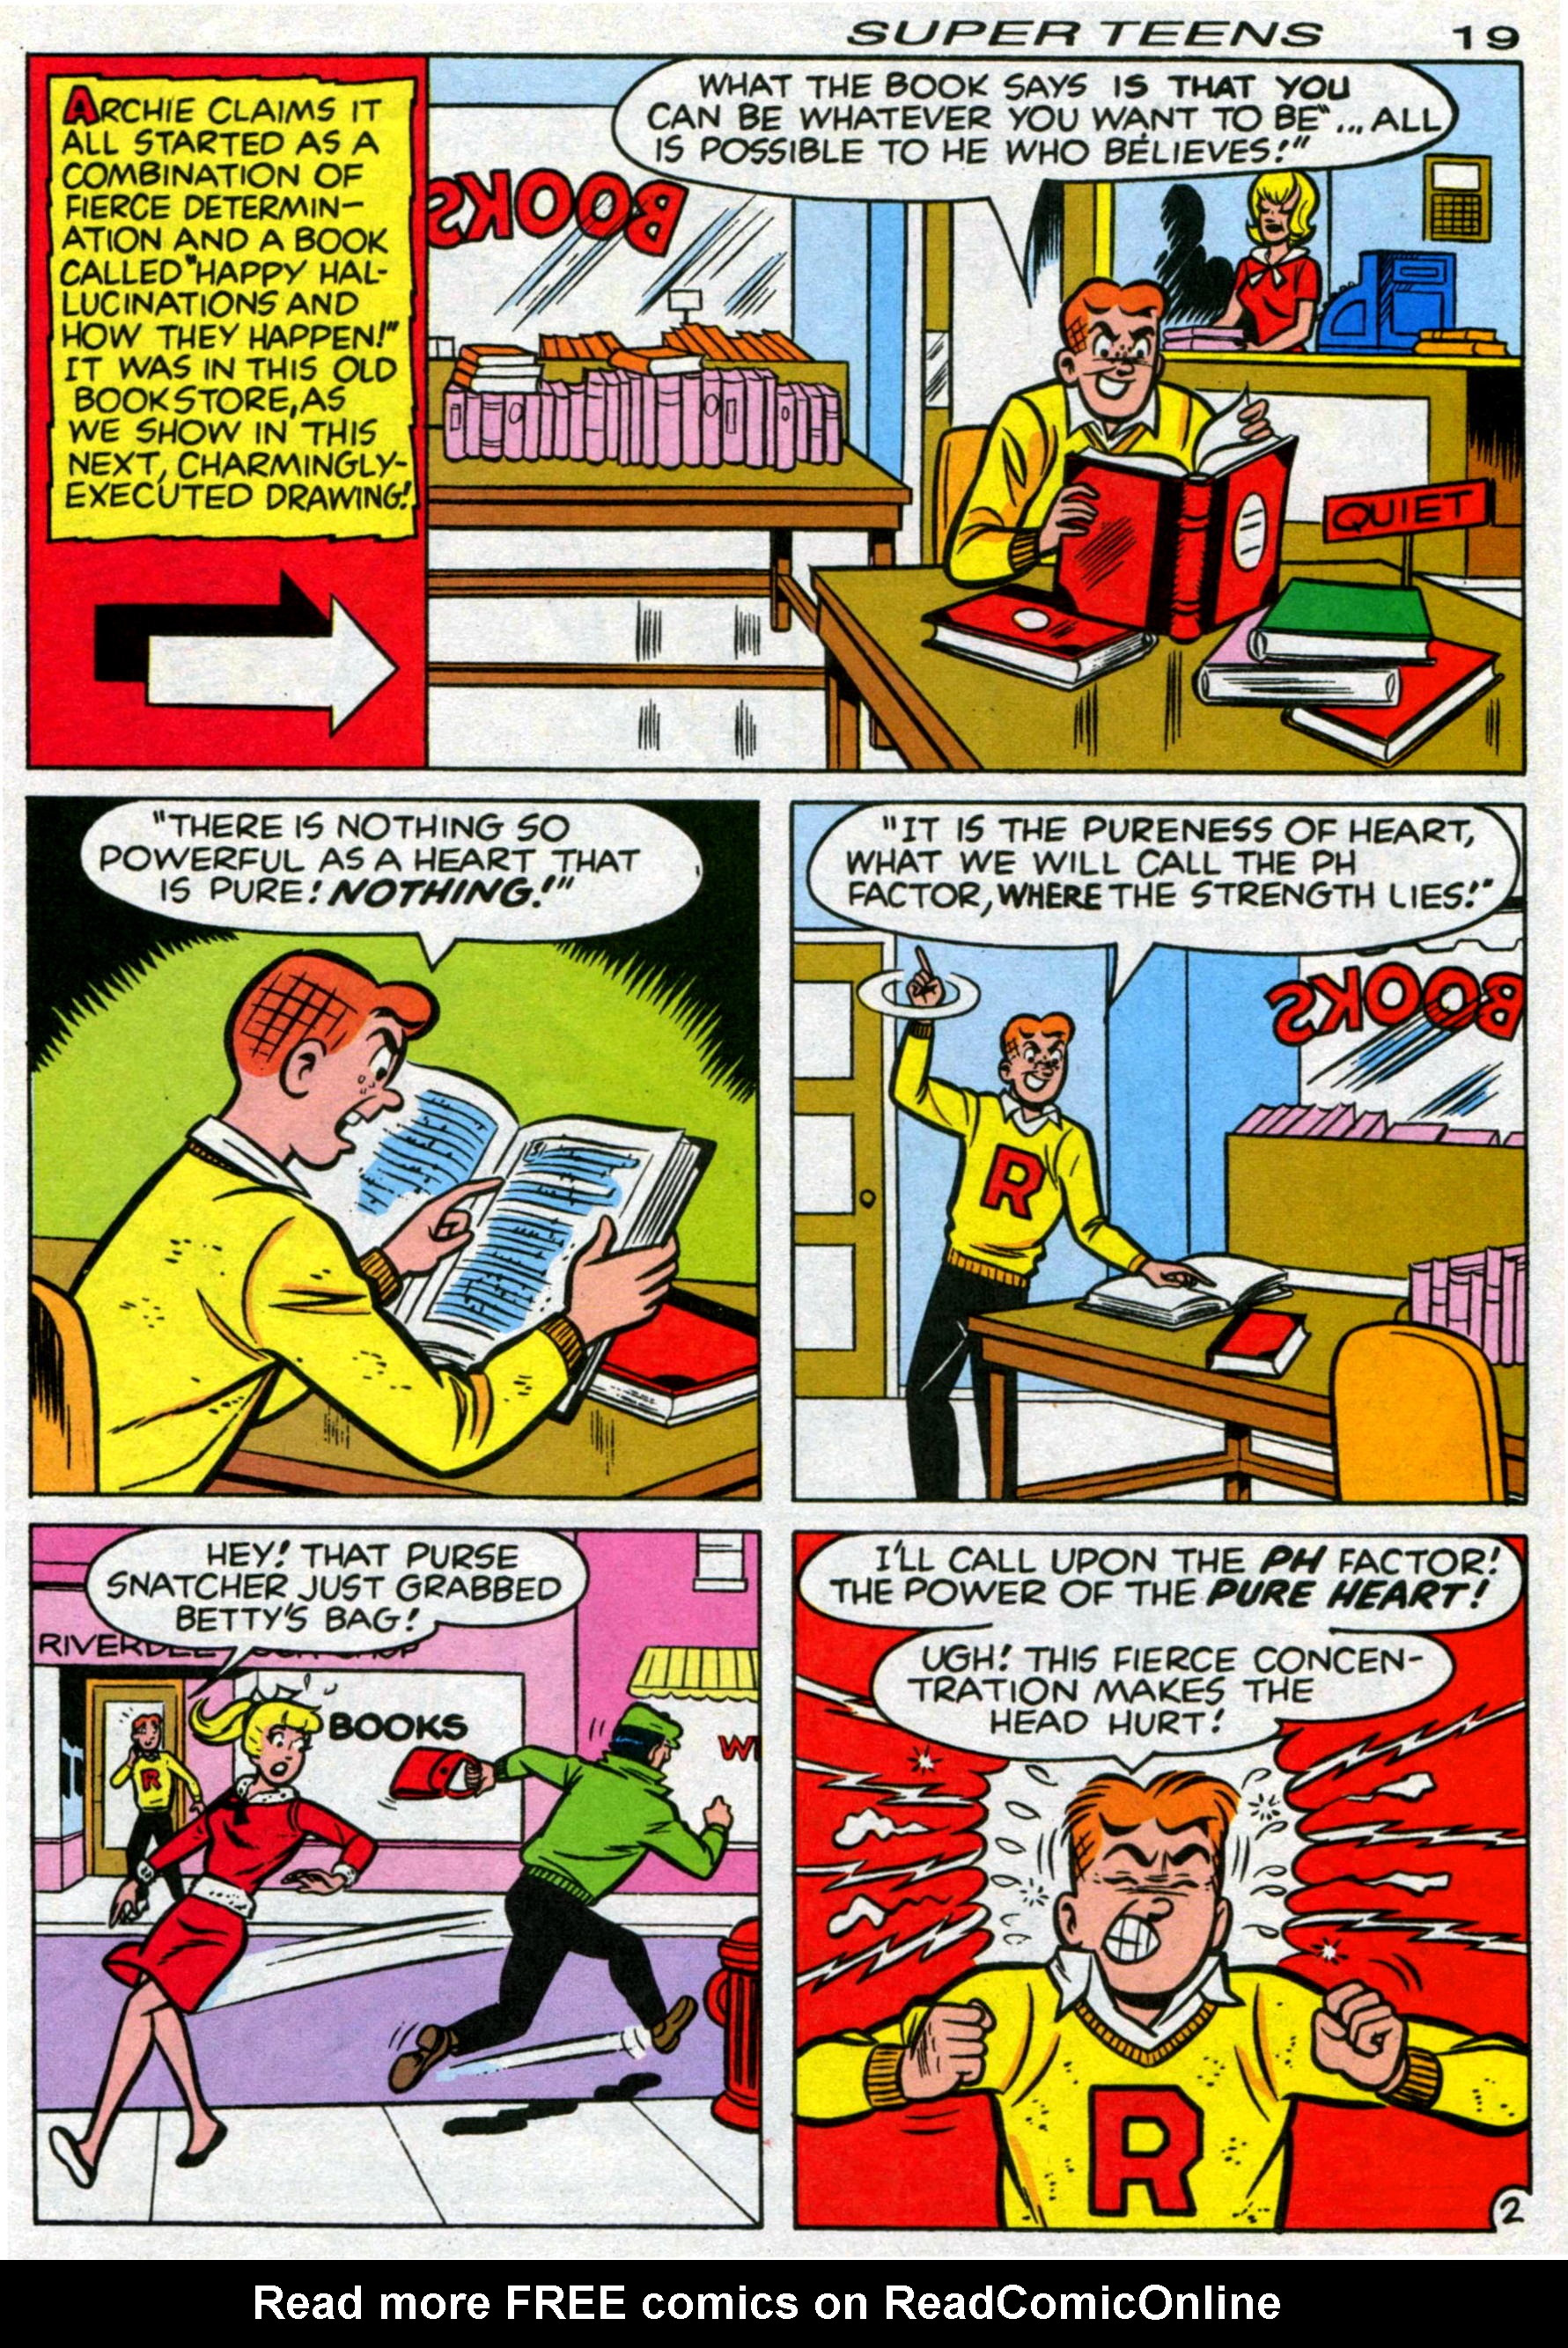 Read online Archie's Super Teens comic -  Issue #1 - 21